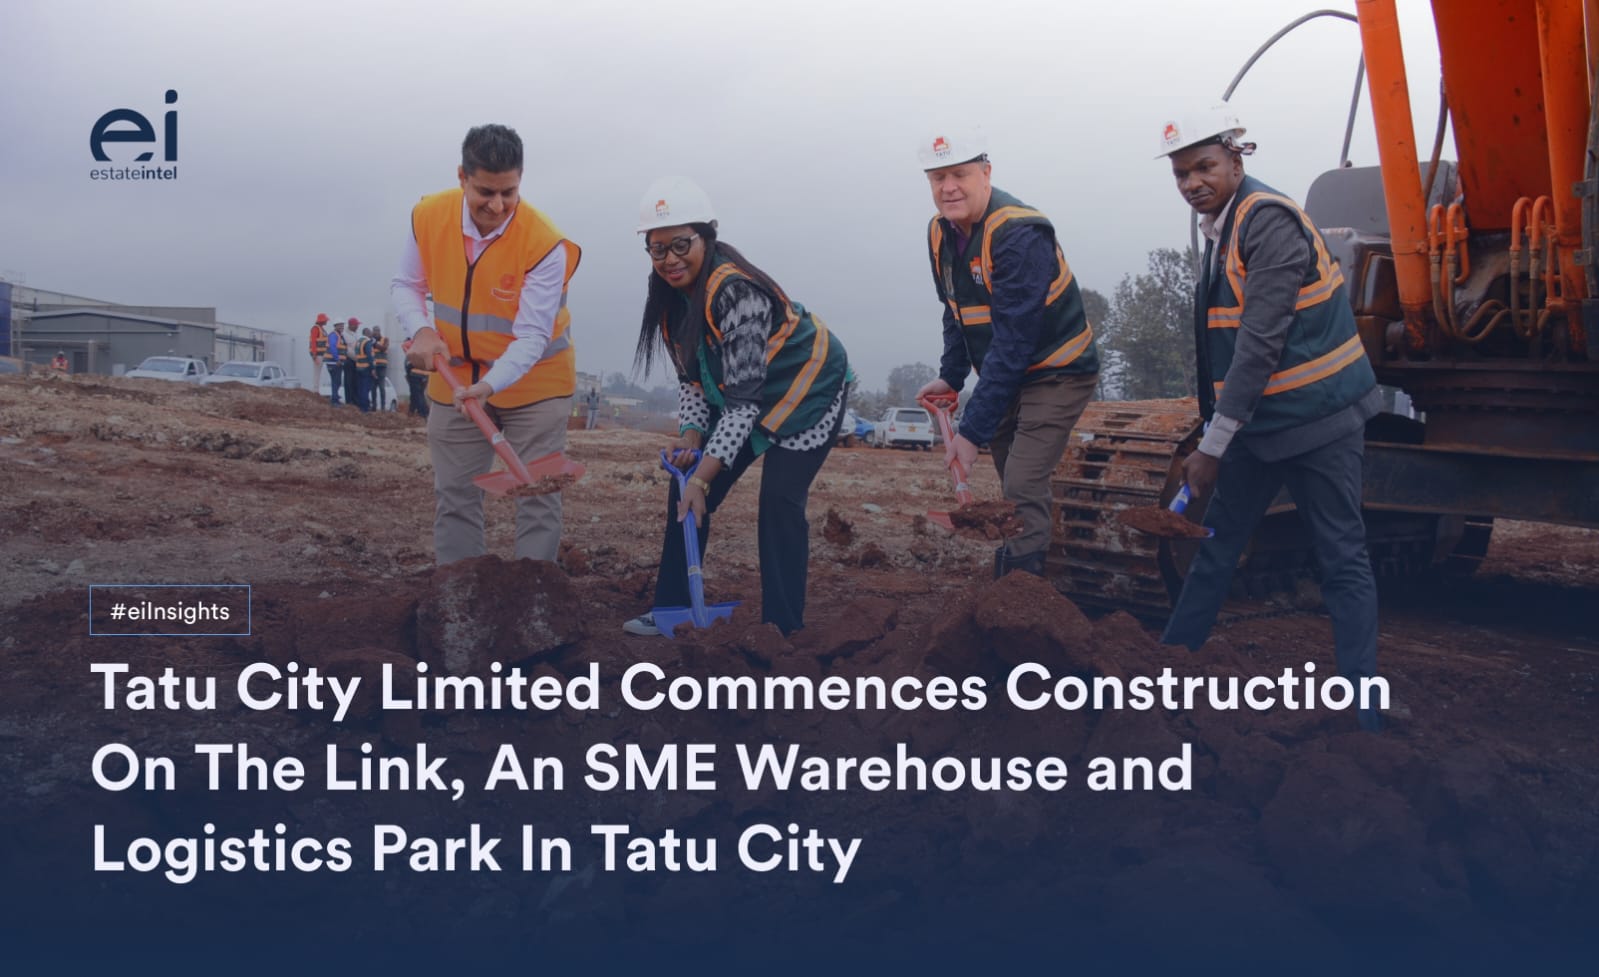 Tatu City Limited Commences Construction On The Link, An SME Warehouse and Logistics Park In Tatu City